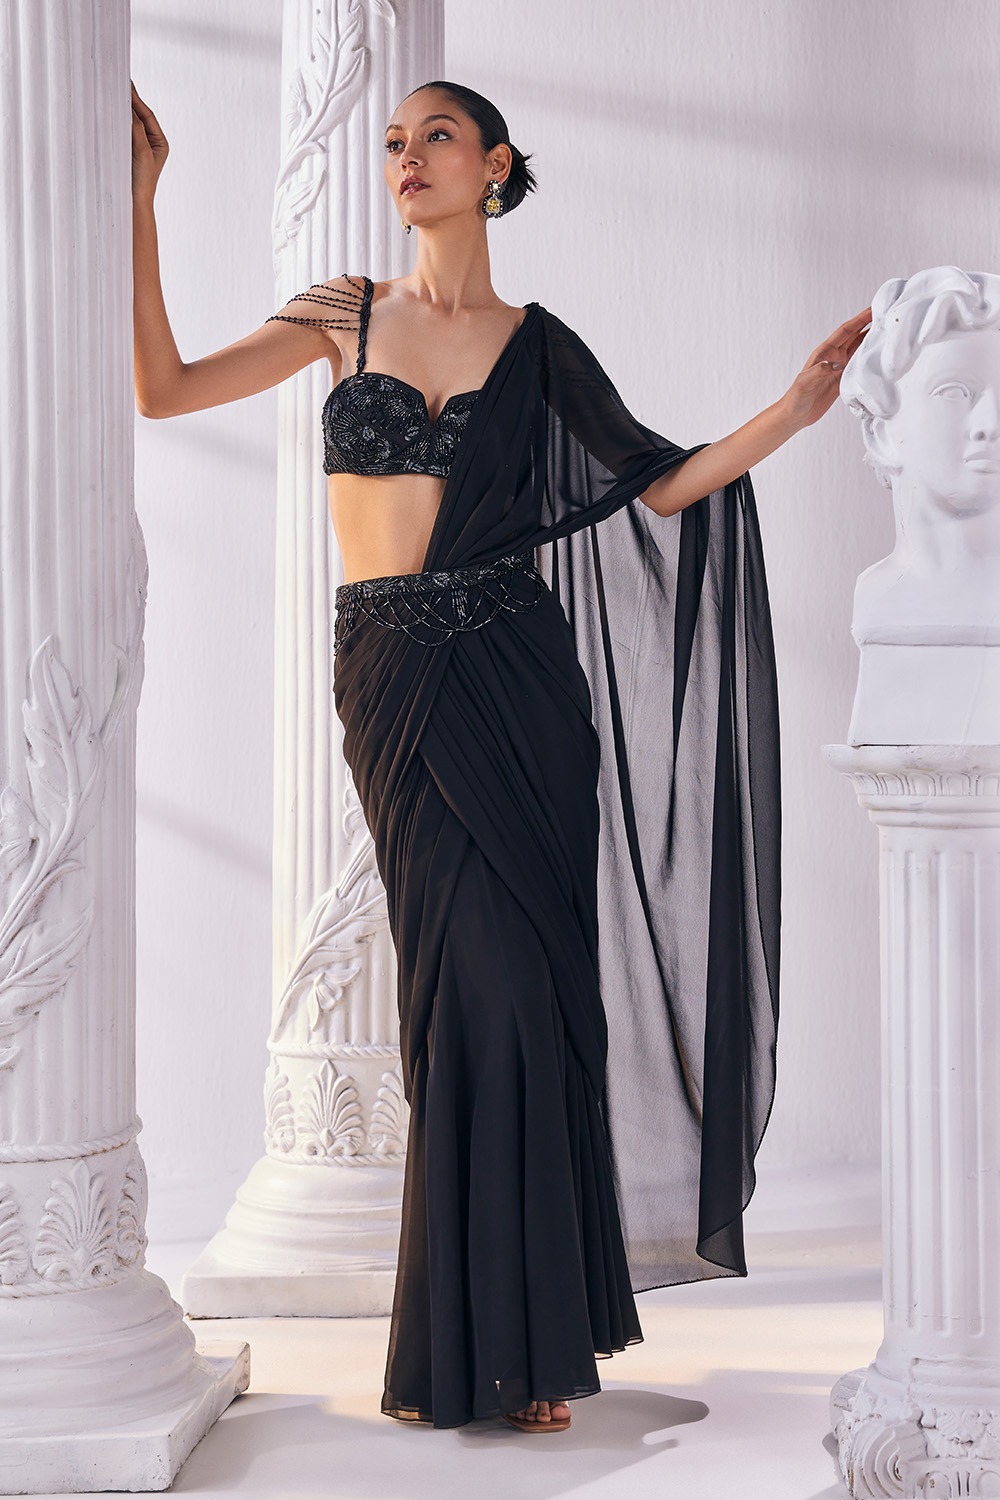 Draped Saree With Bustier And a Statement Belt